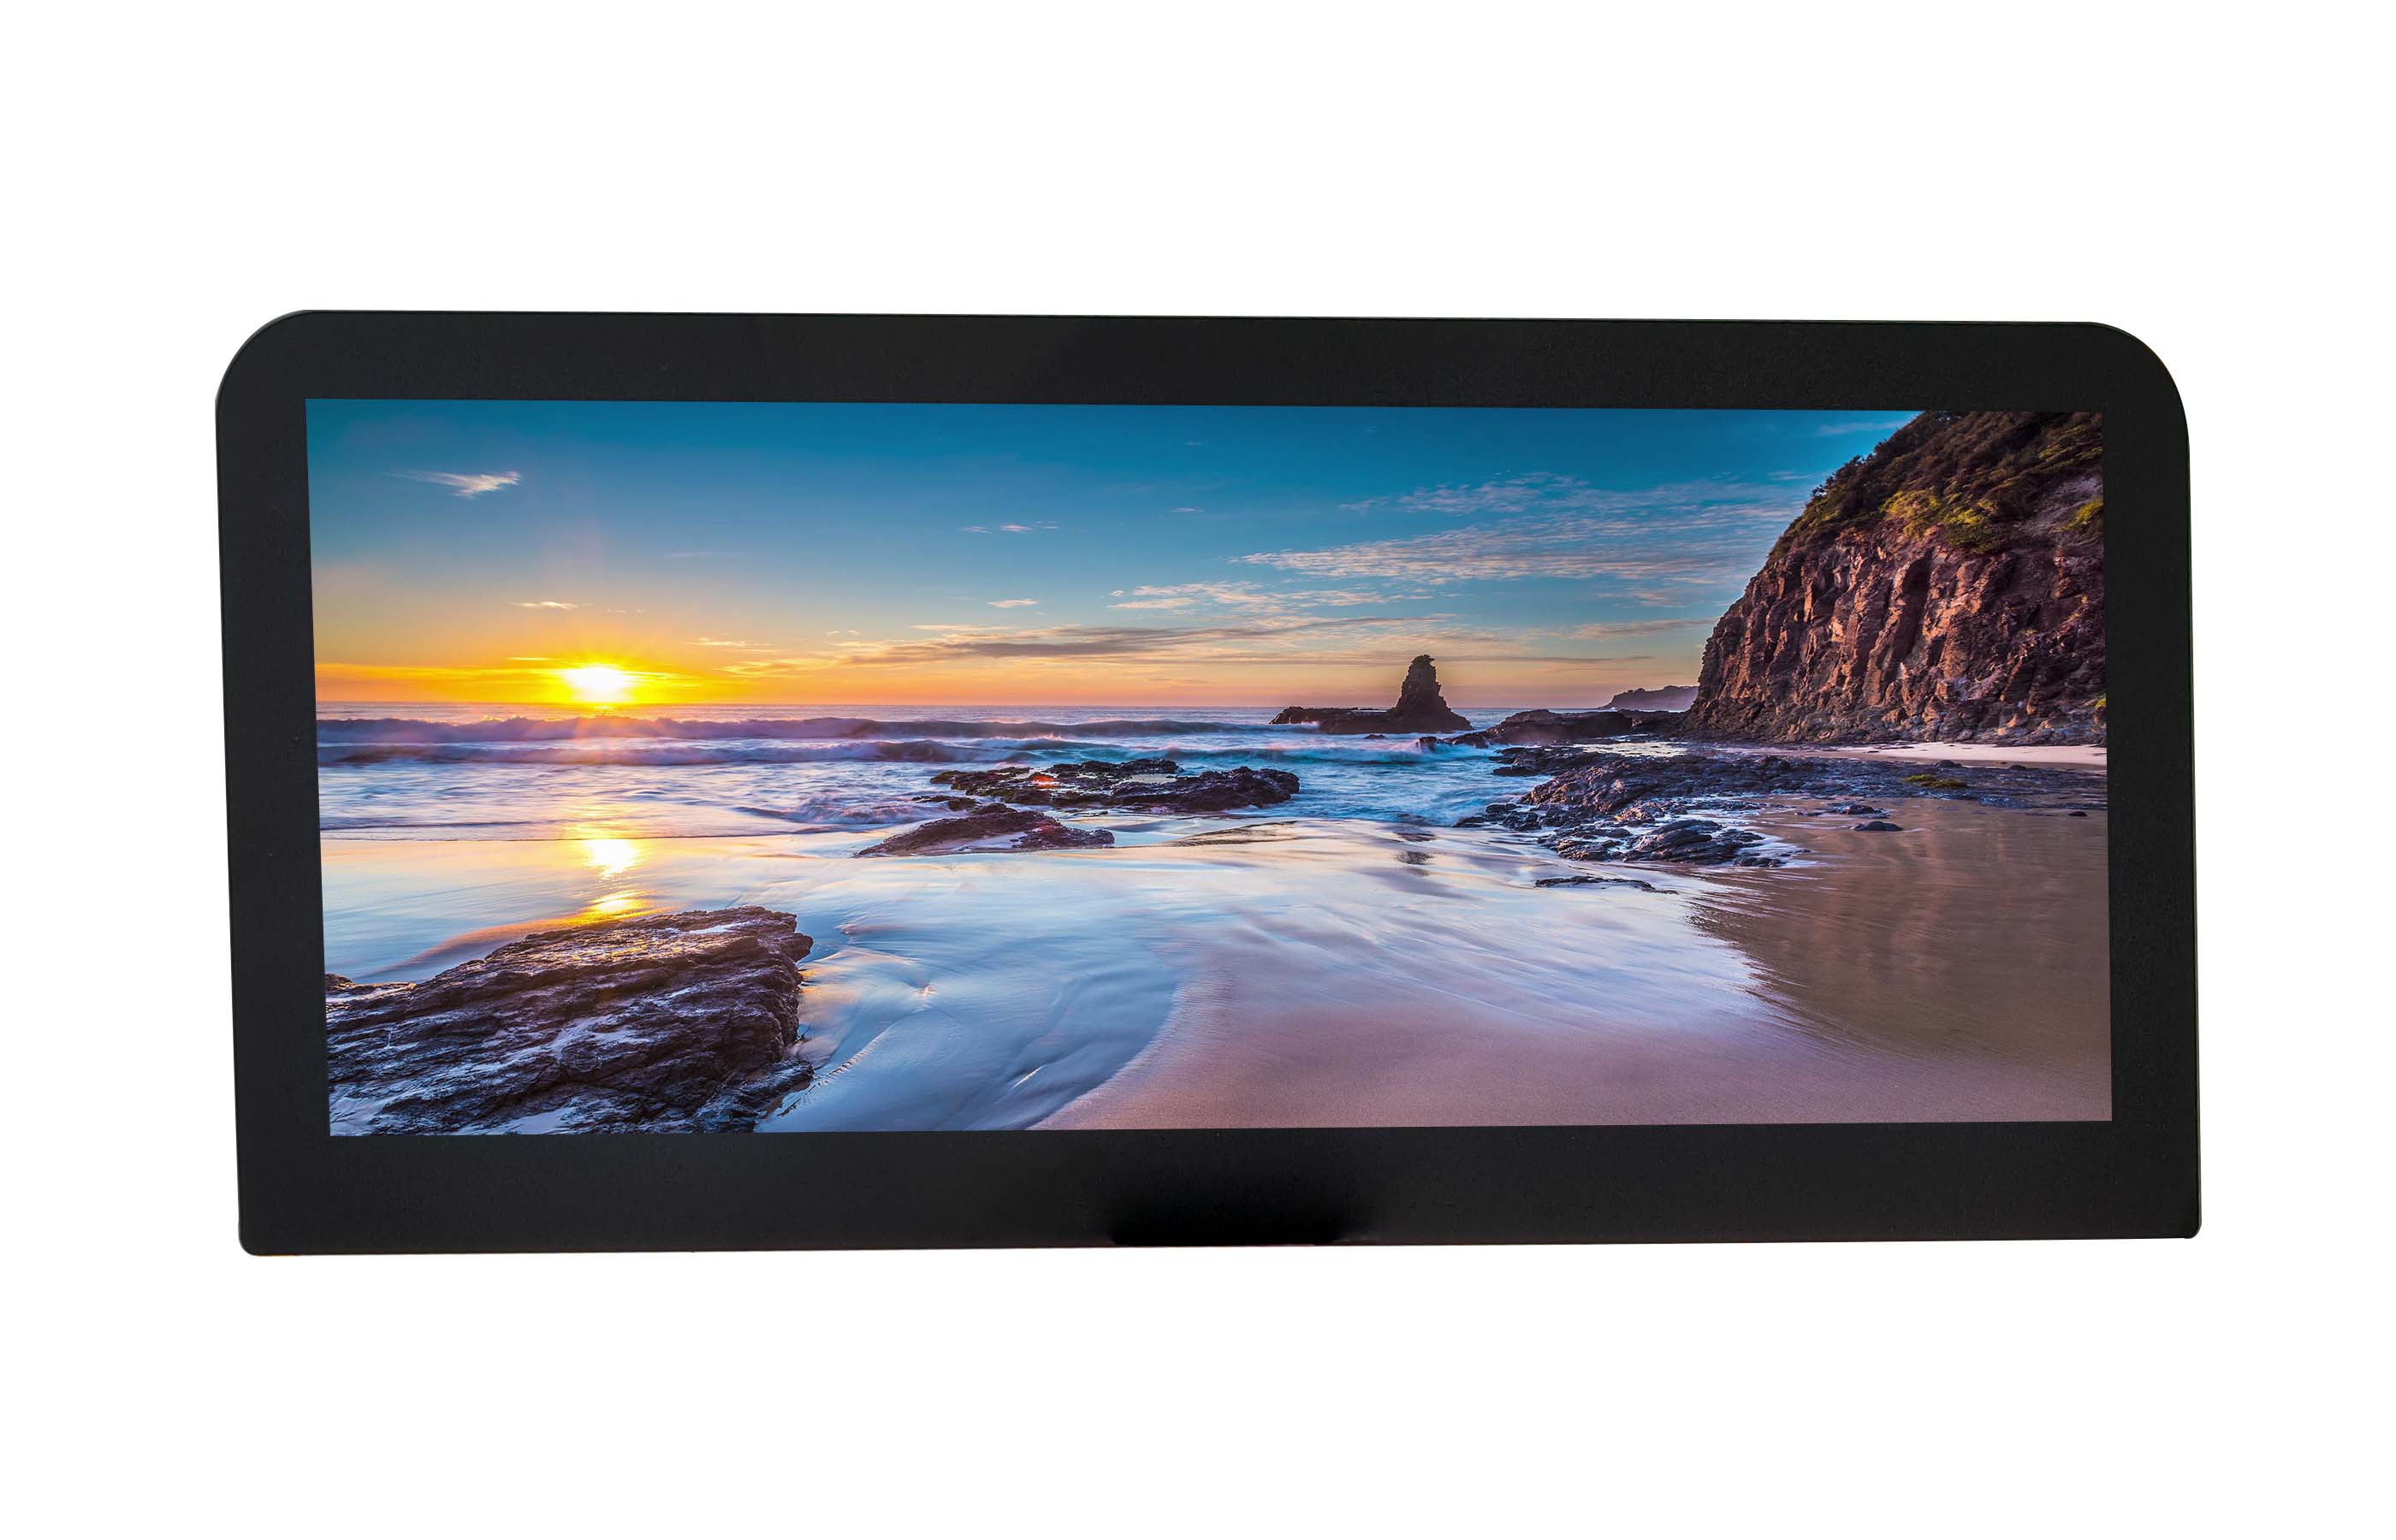 12.3 inch 1920 *720 IPS Bar type TFT LCD with PCAP & Optical bonding